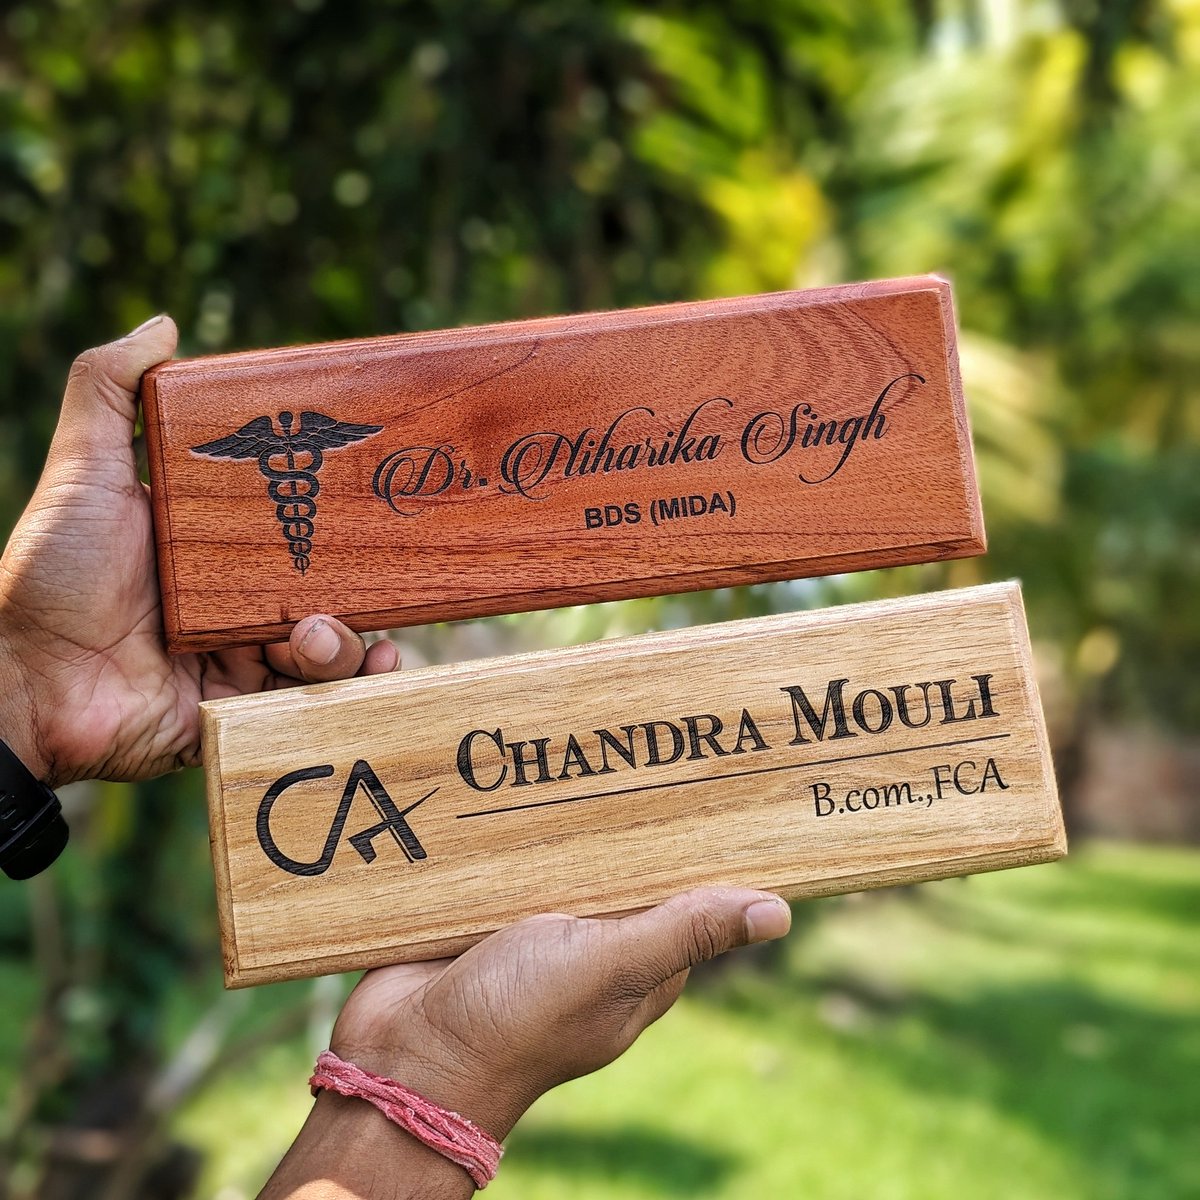 Personalised wooden nameplates for your office. Customise them with your logo, name and designation. #woodgeek #woodgeekstore #nameplate #woodennameplate #namesign #officenameplate #officesign #desknameplate #bulkorder #corporategifts #personalisedgifts #customgifts #woodworking